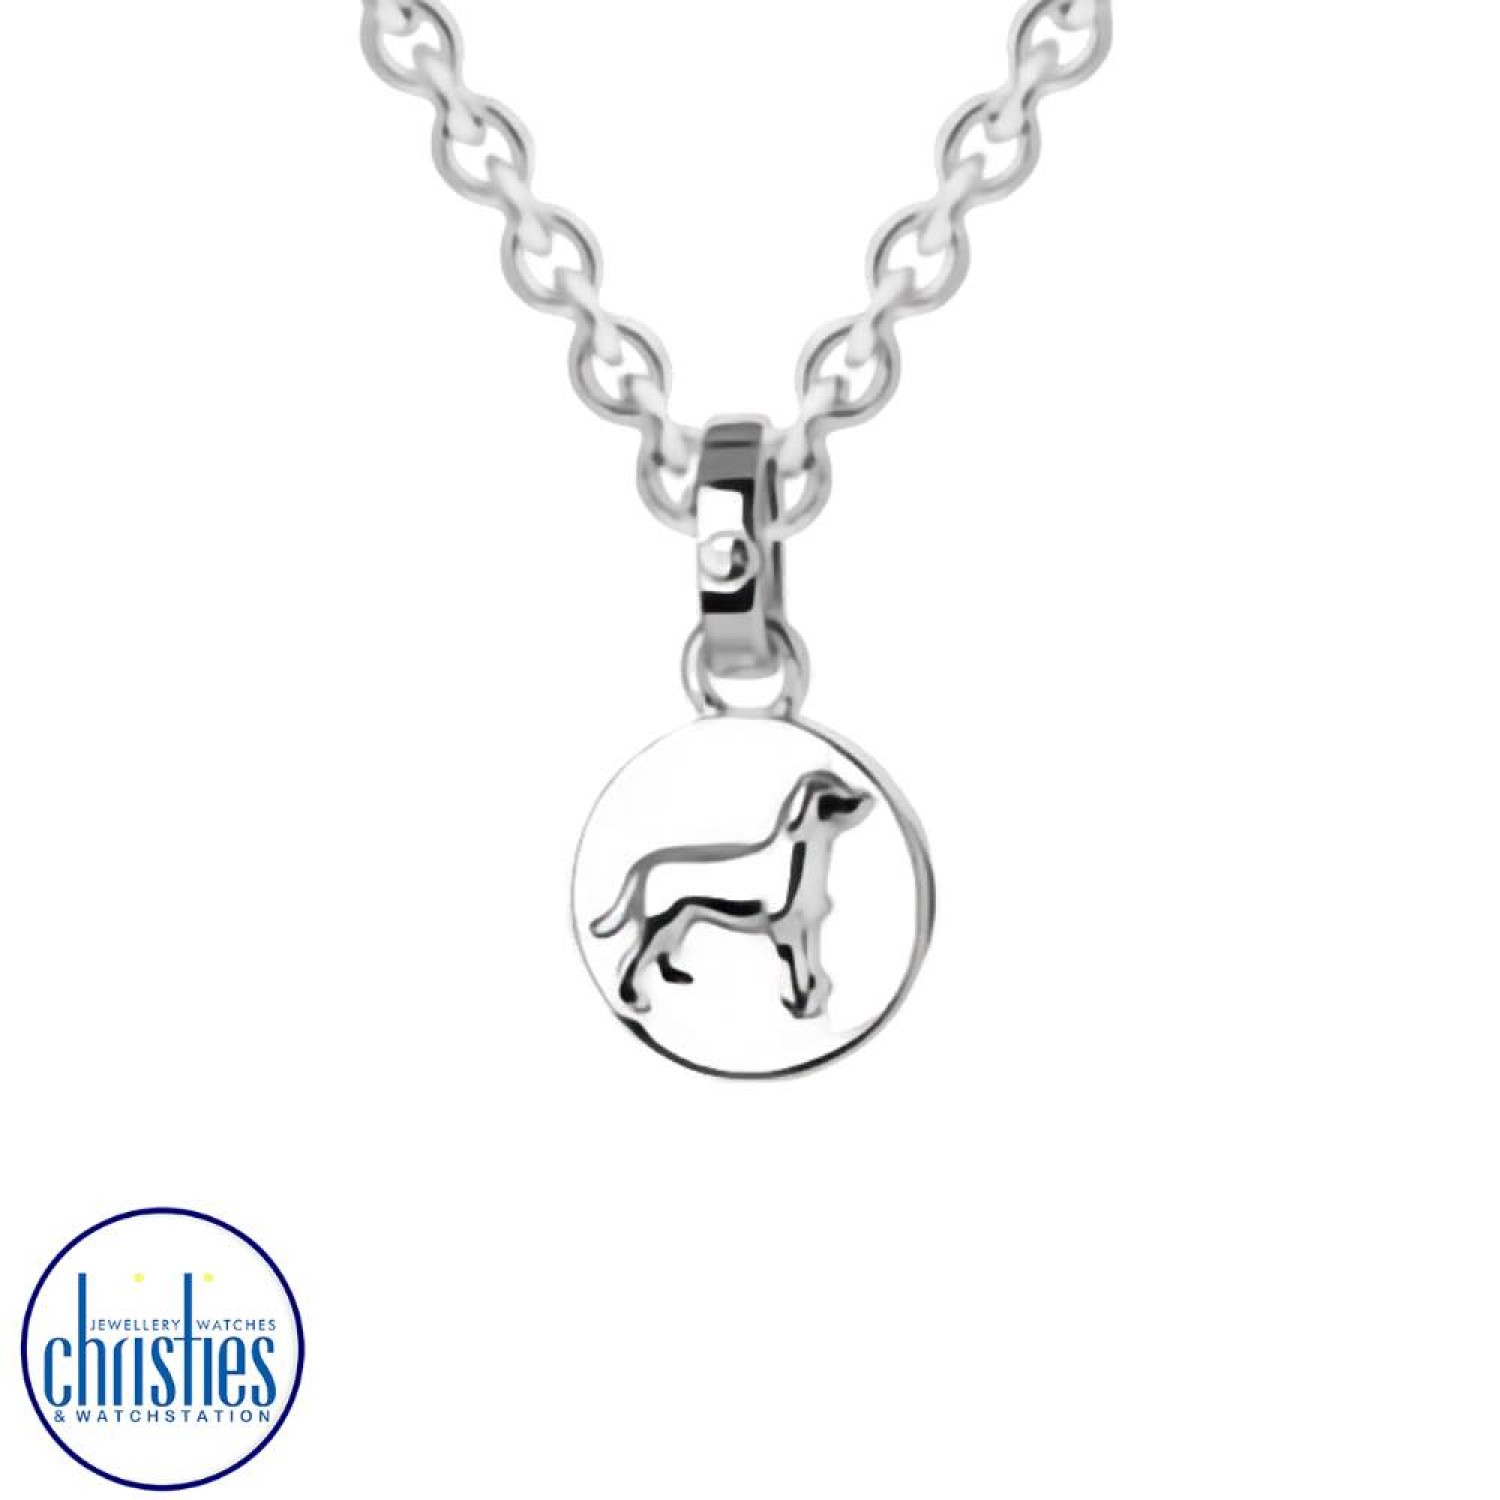 Dog Jewellery Silver Dog Pendant Necklace. The dog is man’s most loyal and loving companion, lending truth to the statement of ‘man's best friend’. horseshoe jewellery nz